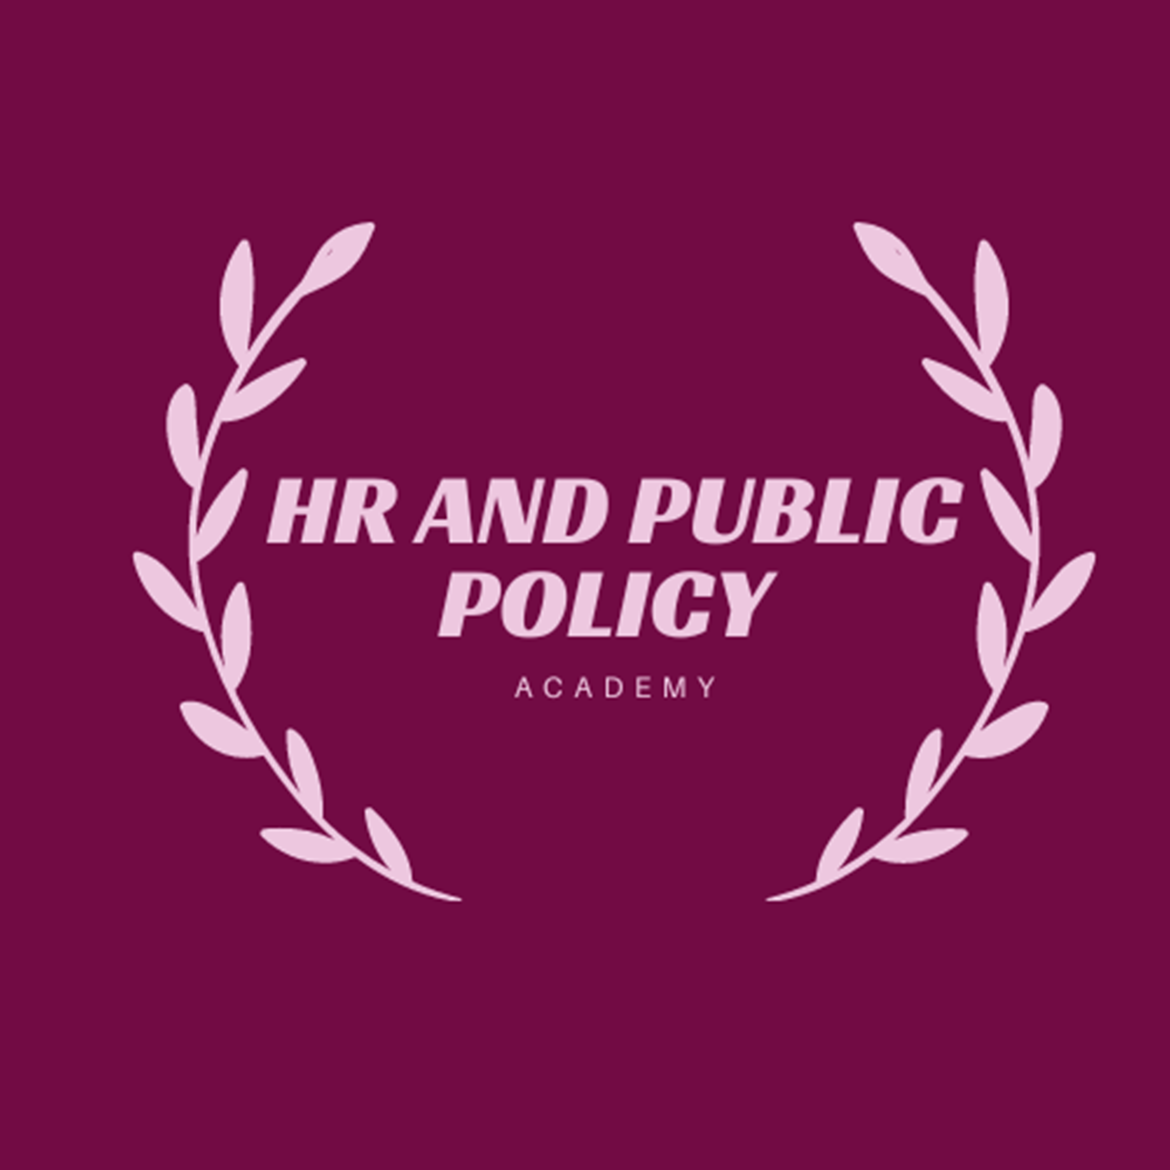 HR and Public Policy academy